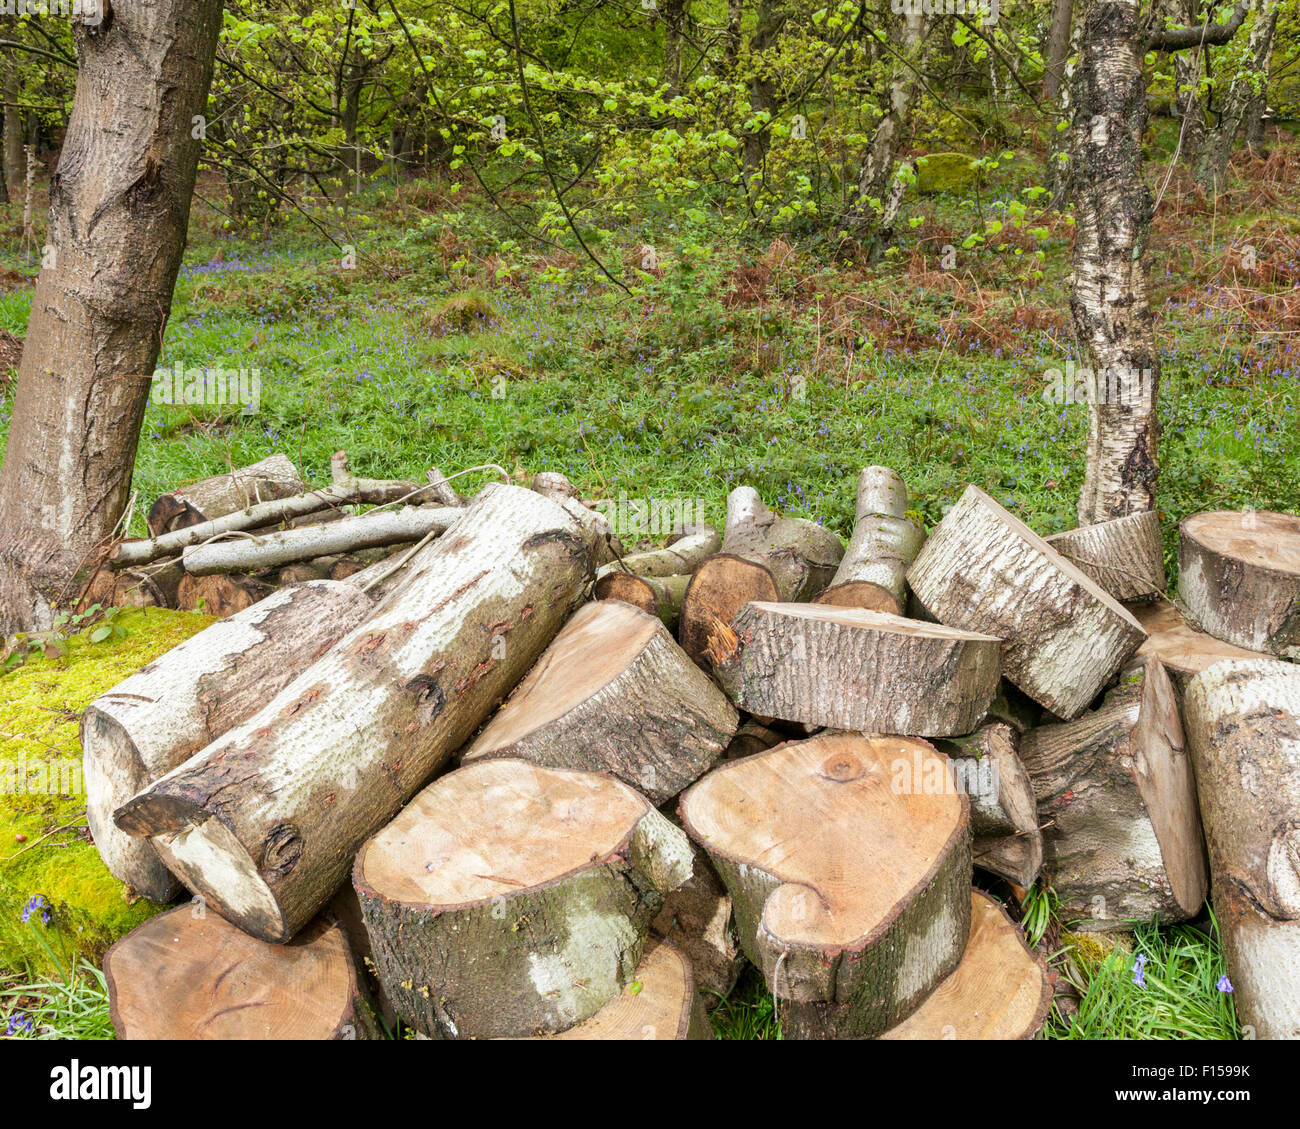 A small wood pile of sawn logs in woodland, Derbyshire, England, UK Stock Photo